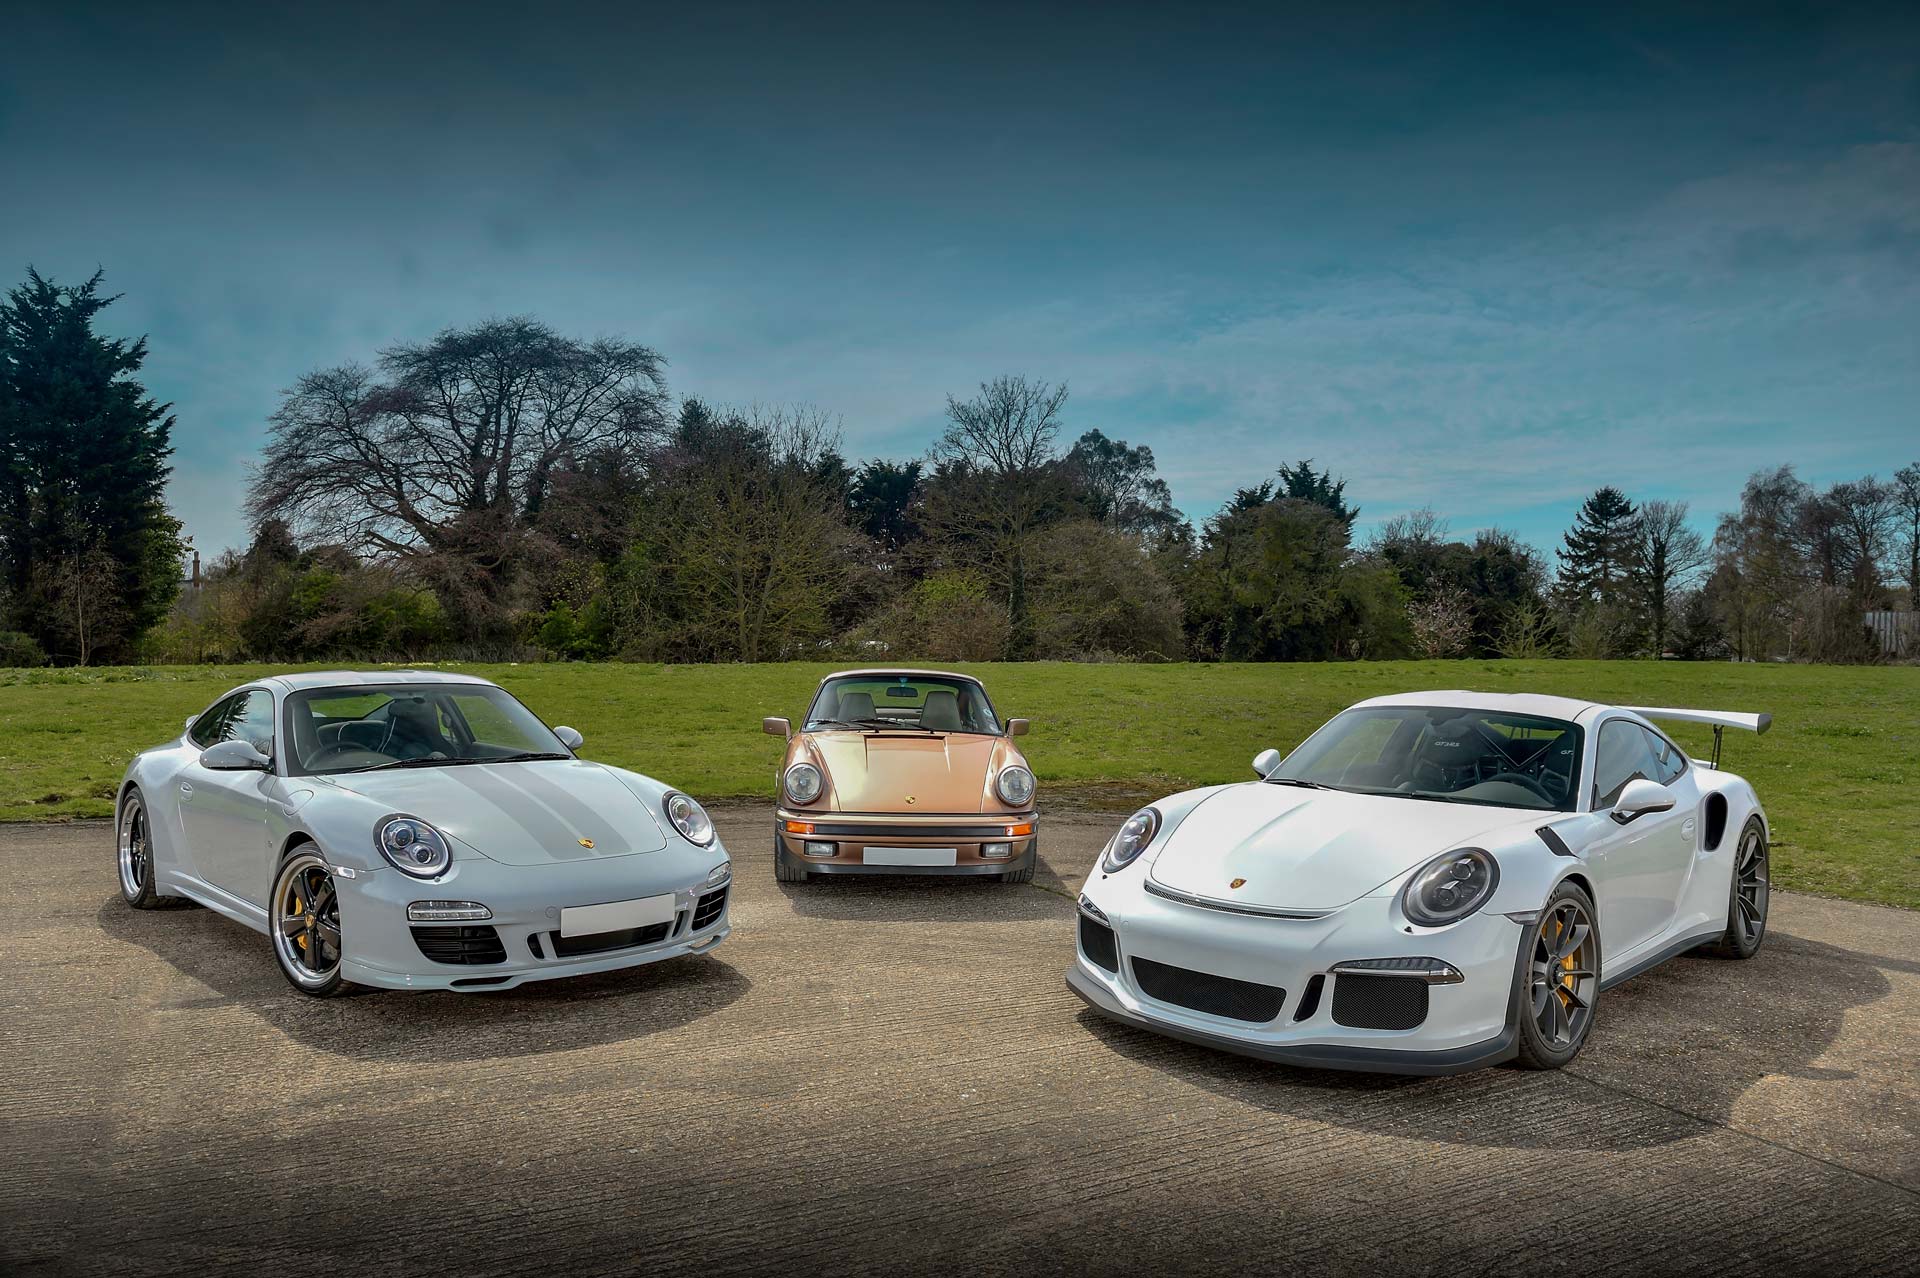 Collection of Porsche cars including 911 Turbo, 911 GT3 RS and Cayenne